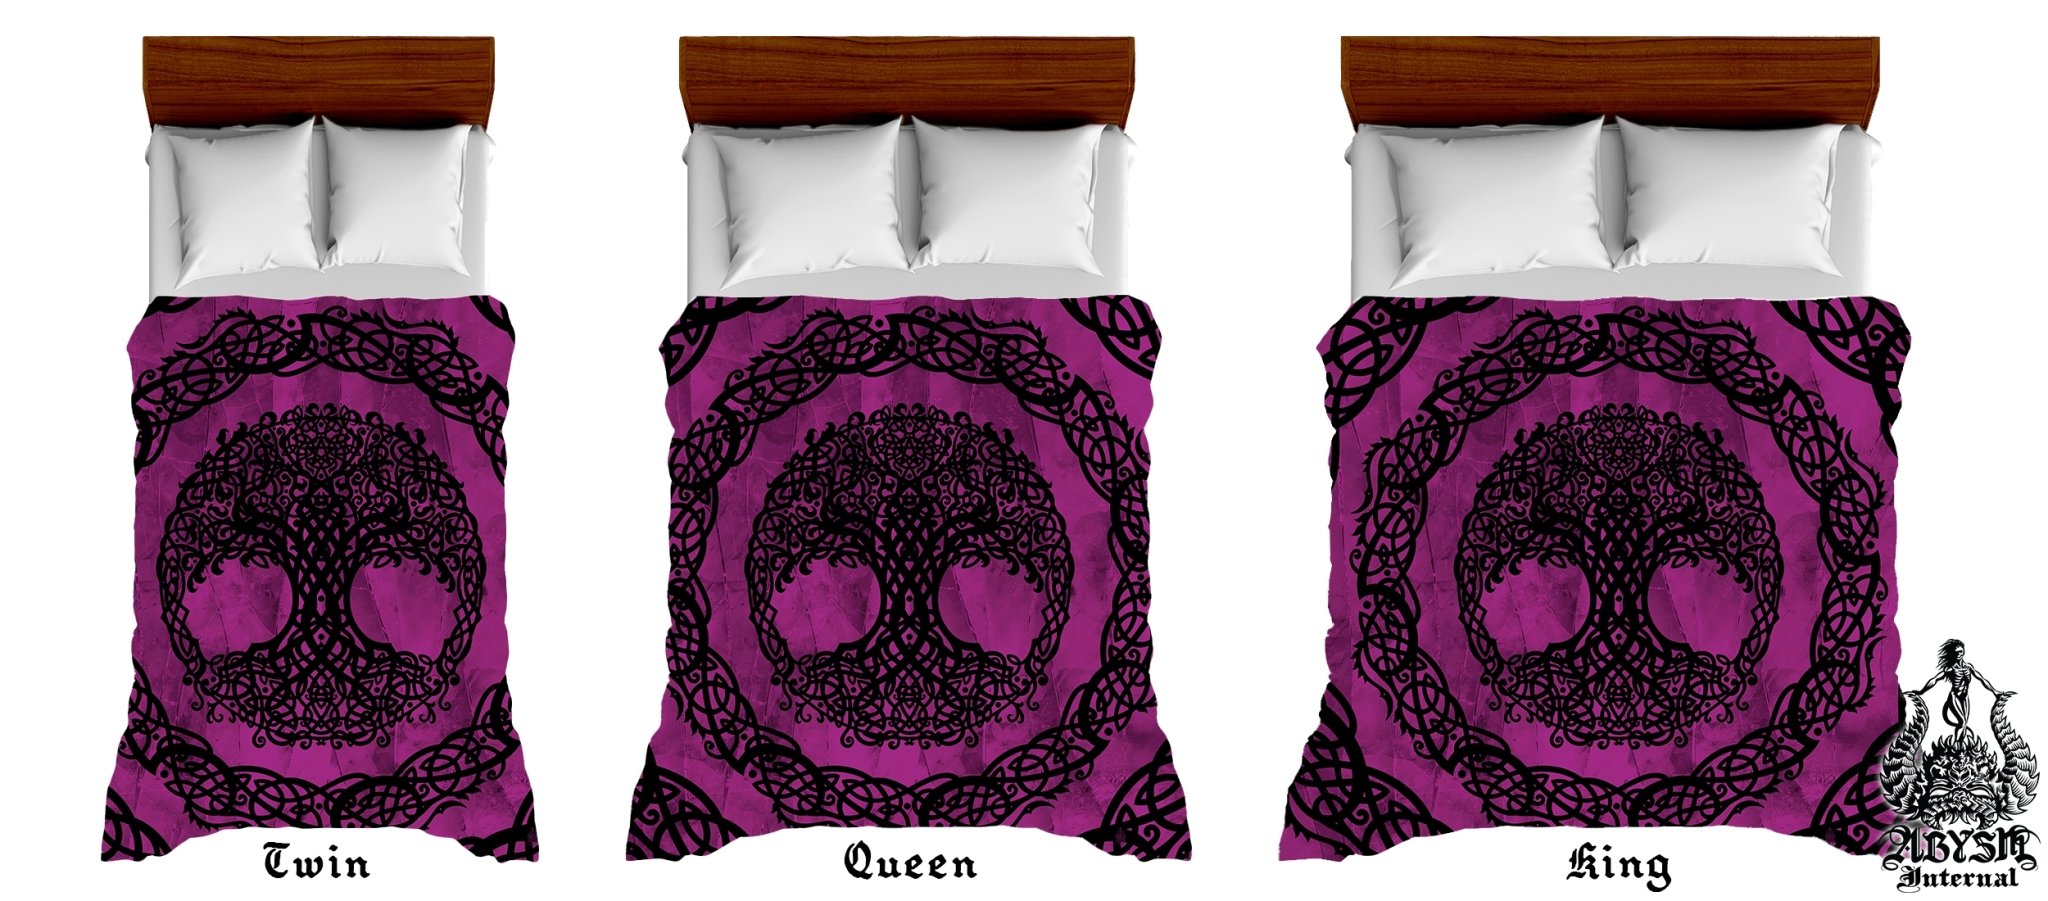 Witchy Bedding Set, Comforter and Duvet, Tree of Life Bed Cover, Witch Bedroom Decor King, Queen and Twin Size - Celtic, Wiccan Black and Pink - Abysm Internal